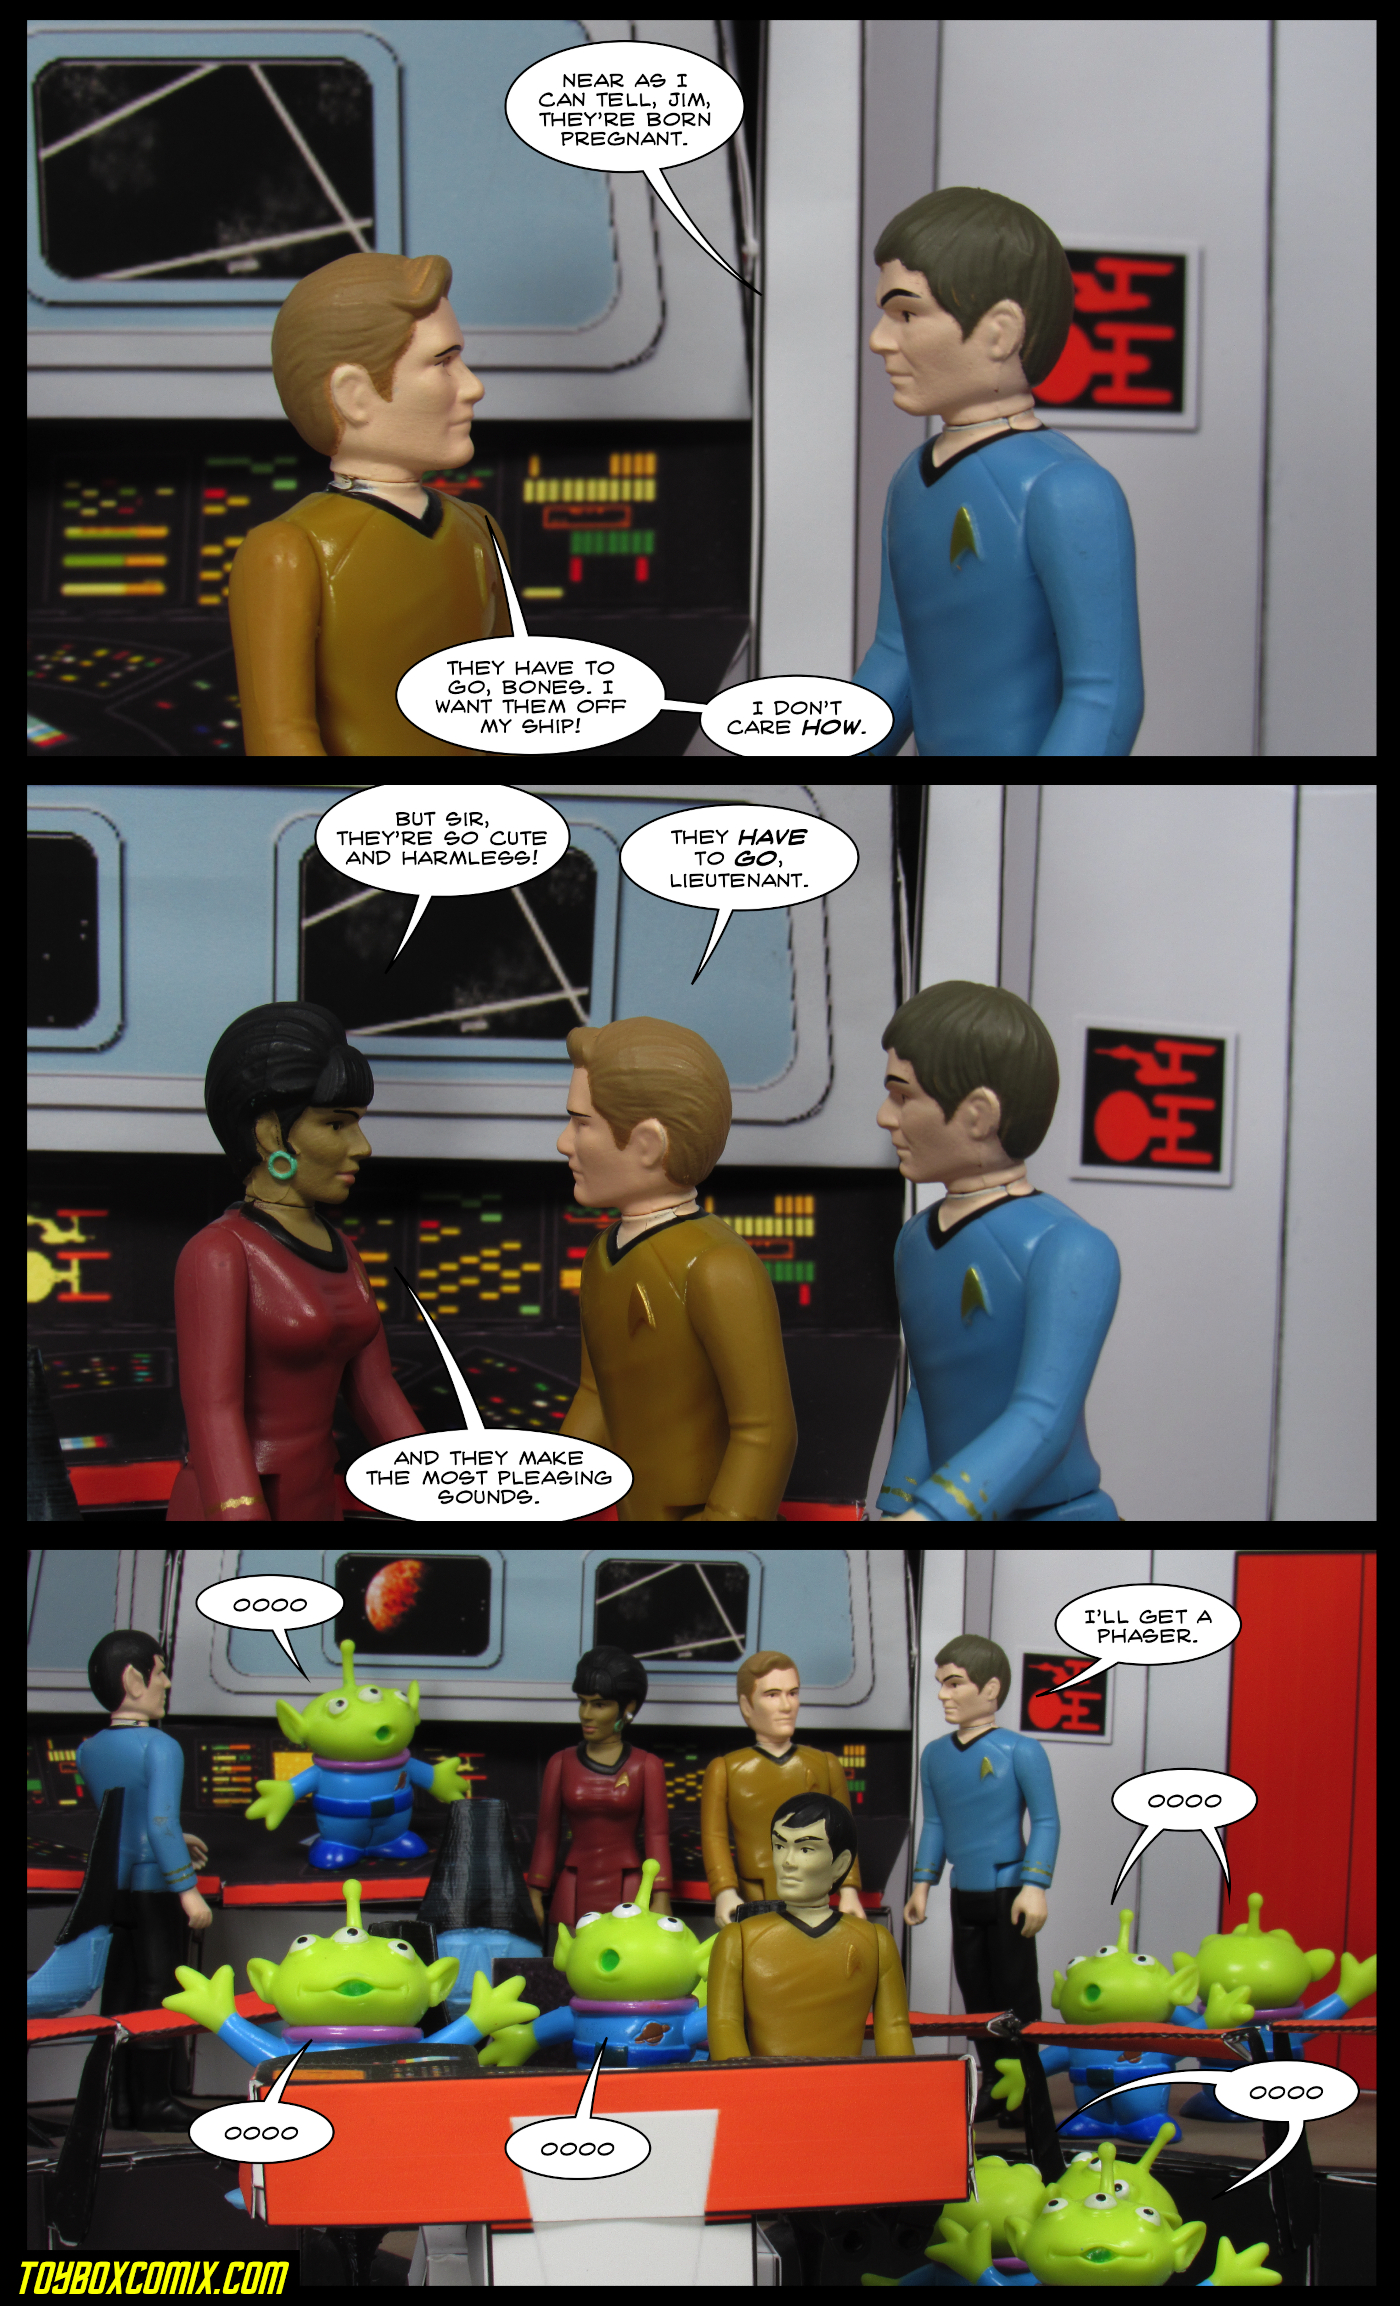 First panel: McCoy: “Near as I can tell, Jim, they’re born pregnant.” Kirk: “They have to go, bones. I want them off my ship! I don’t care how!” Second panel: Uhura: “But sir, they’re so cute and harmless!” Kirk: “They have to go, Lieutenant.” Uhura: “And they make the most pleasing sounds.” Third panel: Zoom out to show the bridge of the Enterprise filled with Little Green Men from Toy Story, all saying “Oooo.” McCoy: “I’ll get a phaser.”